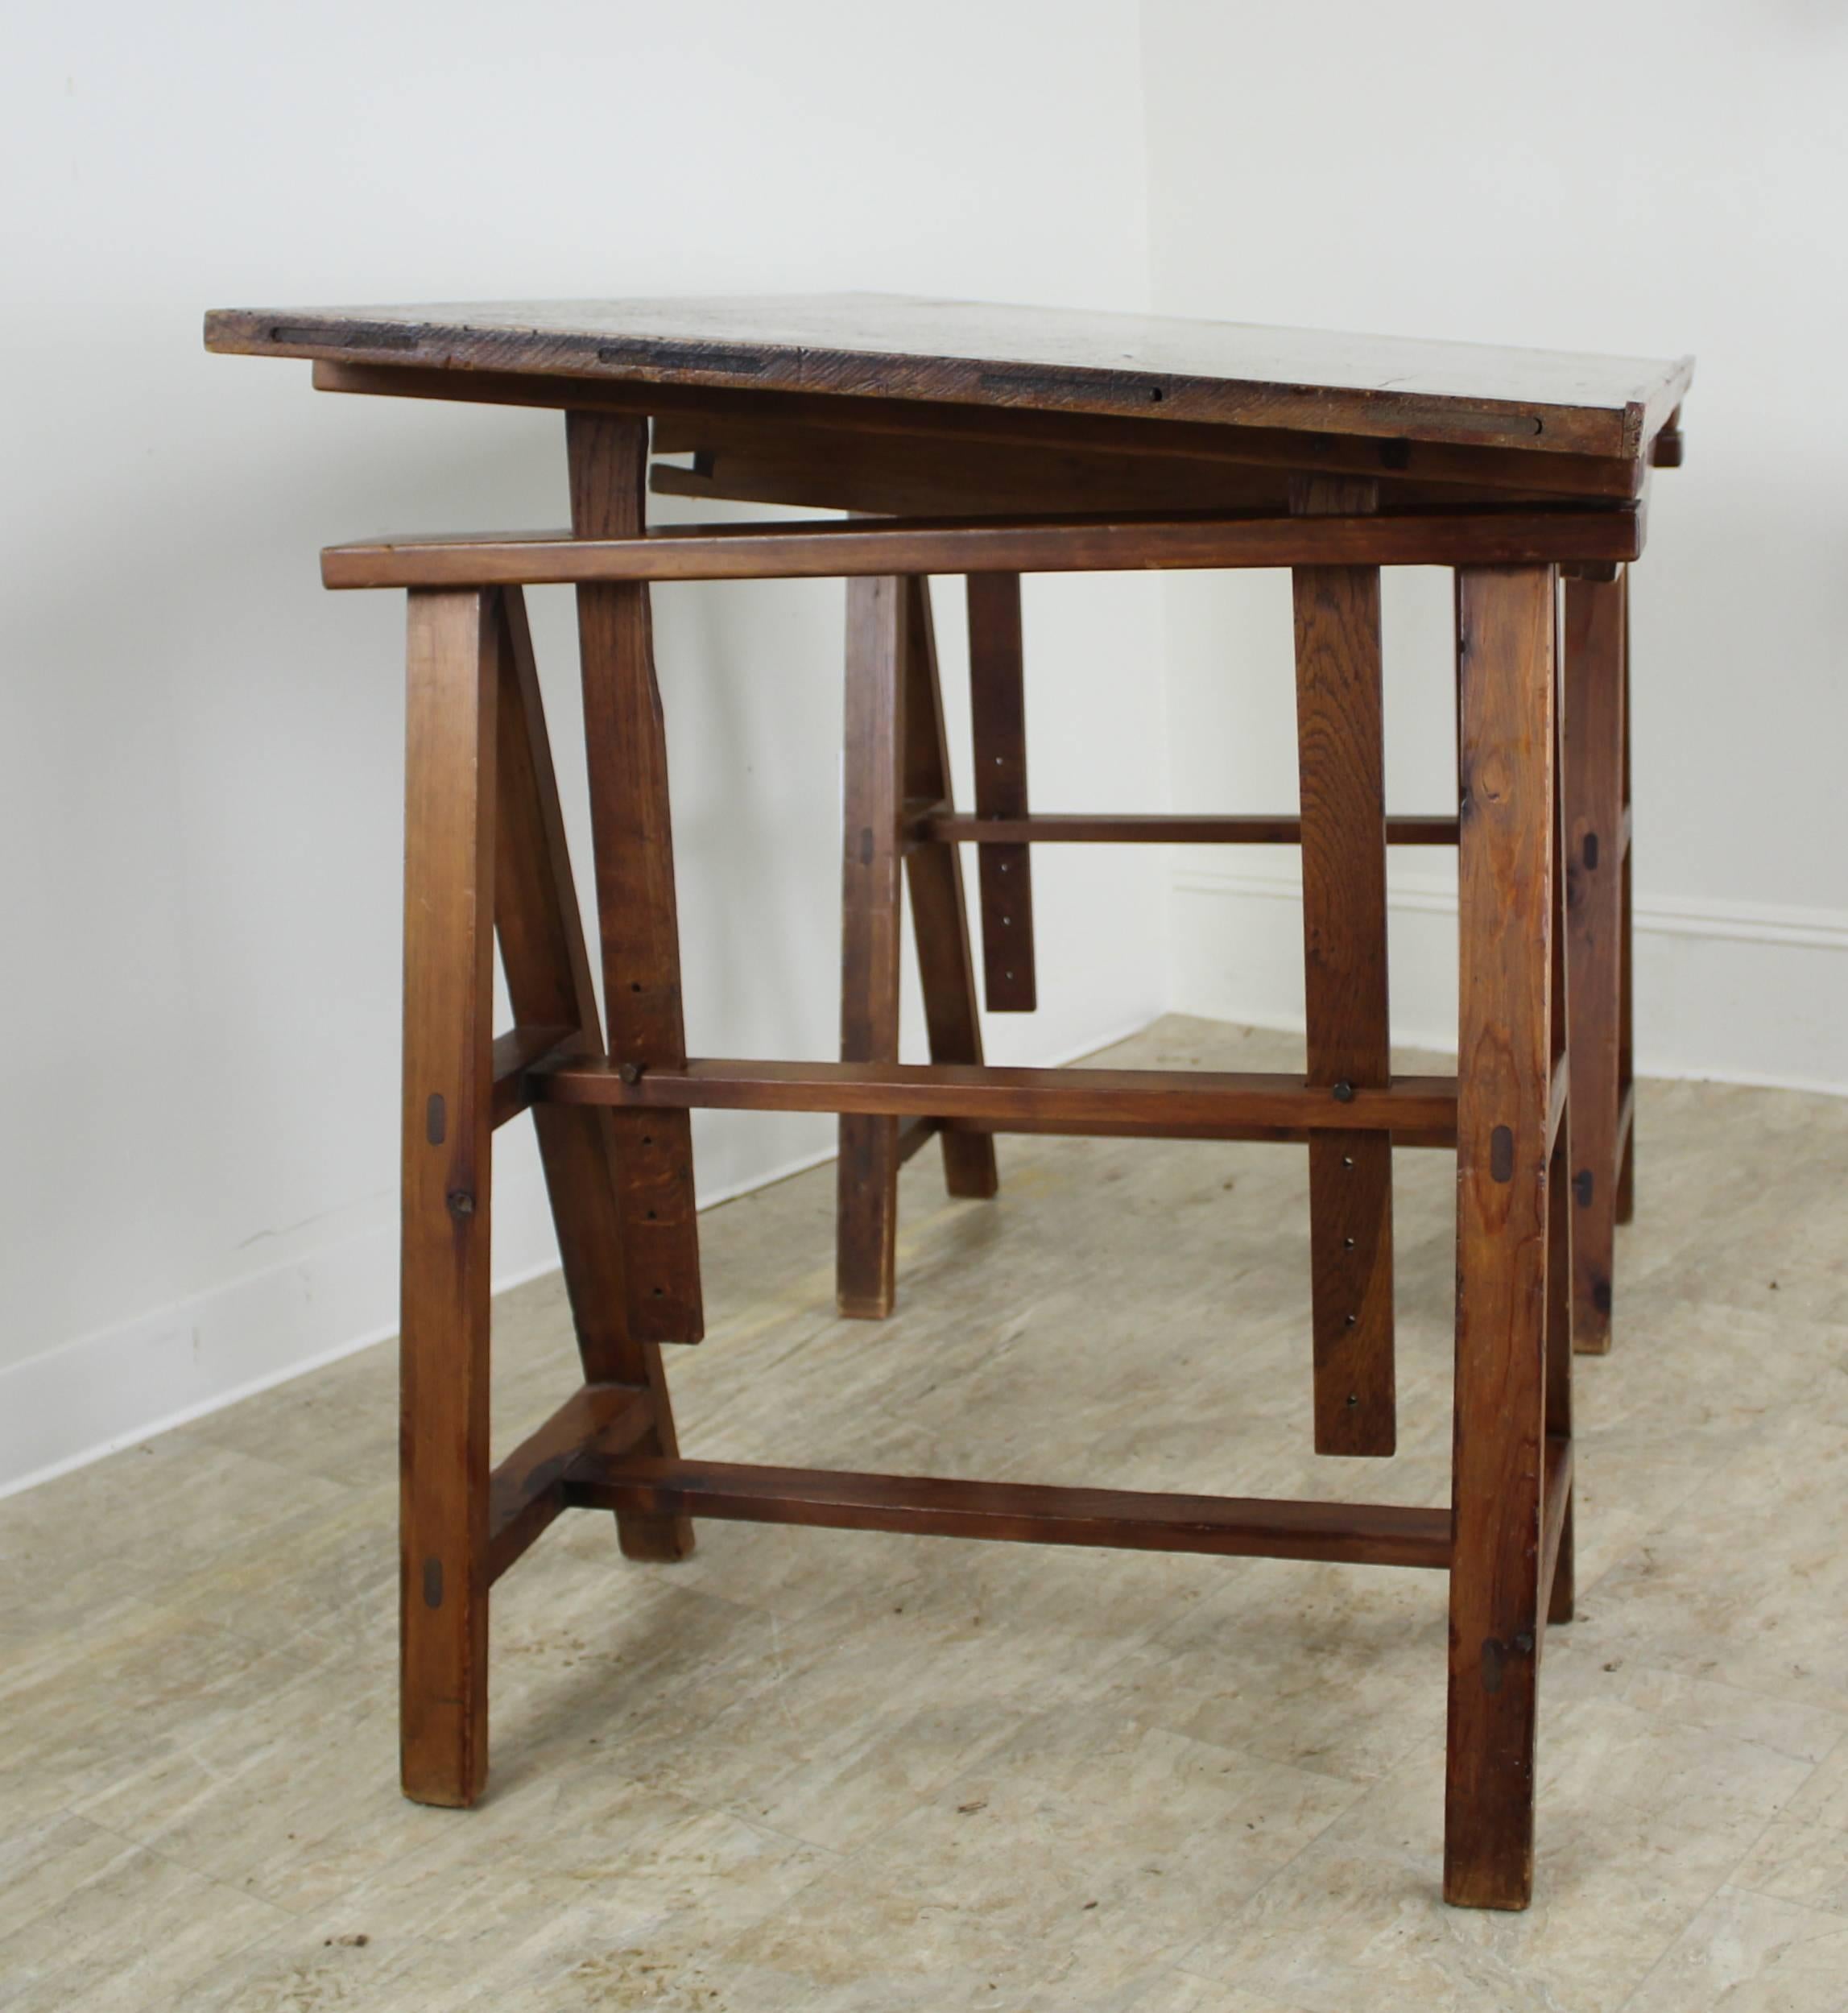 19th Century Antique French Pine Architect's Table, Adjustable